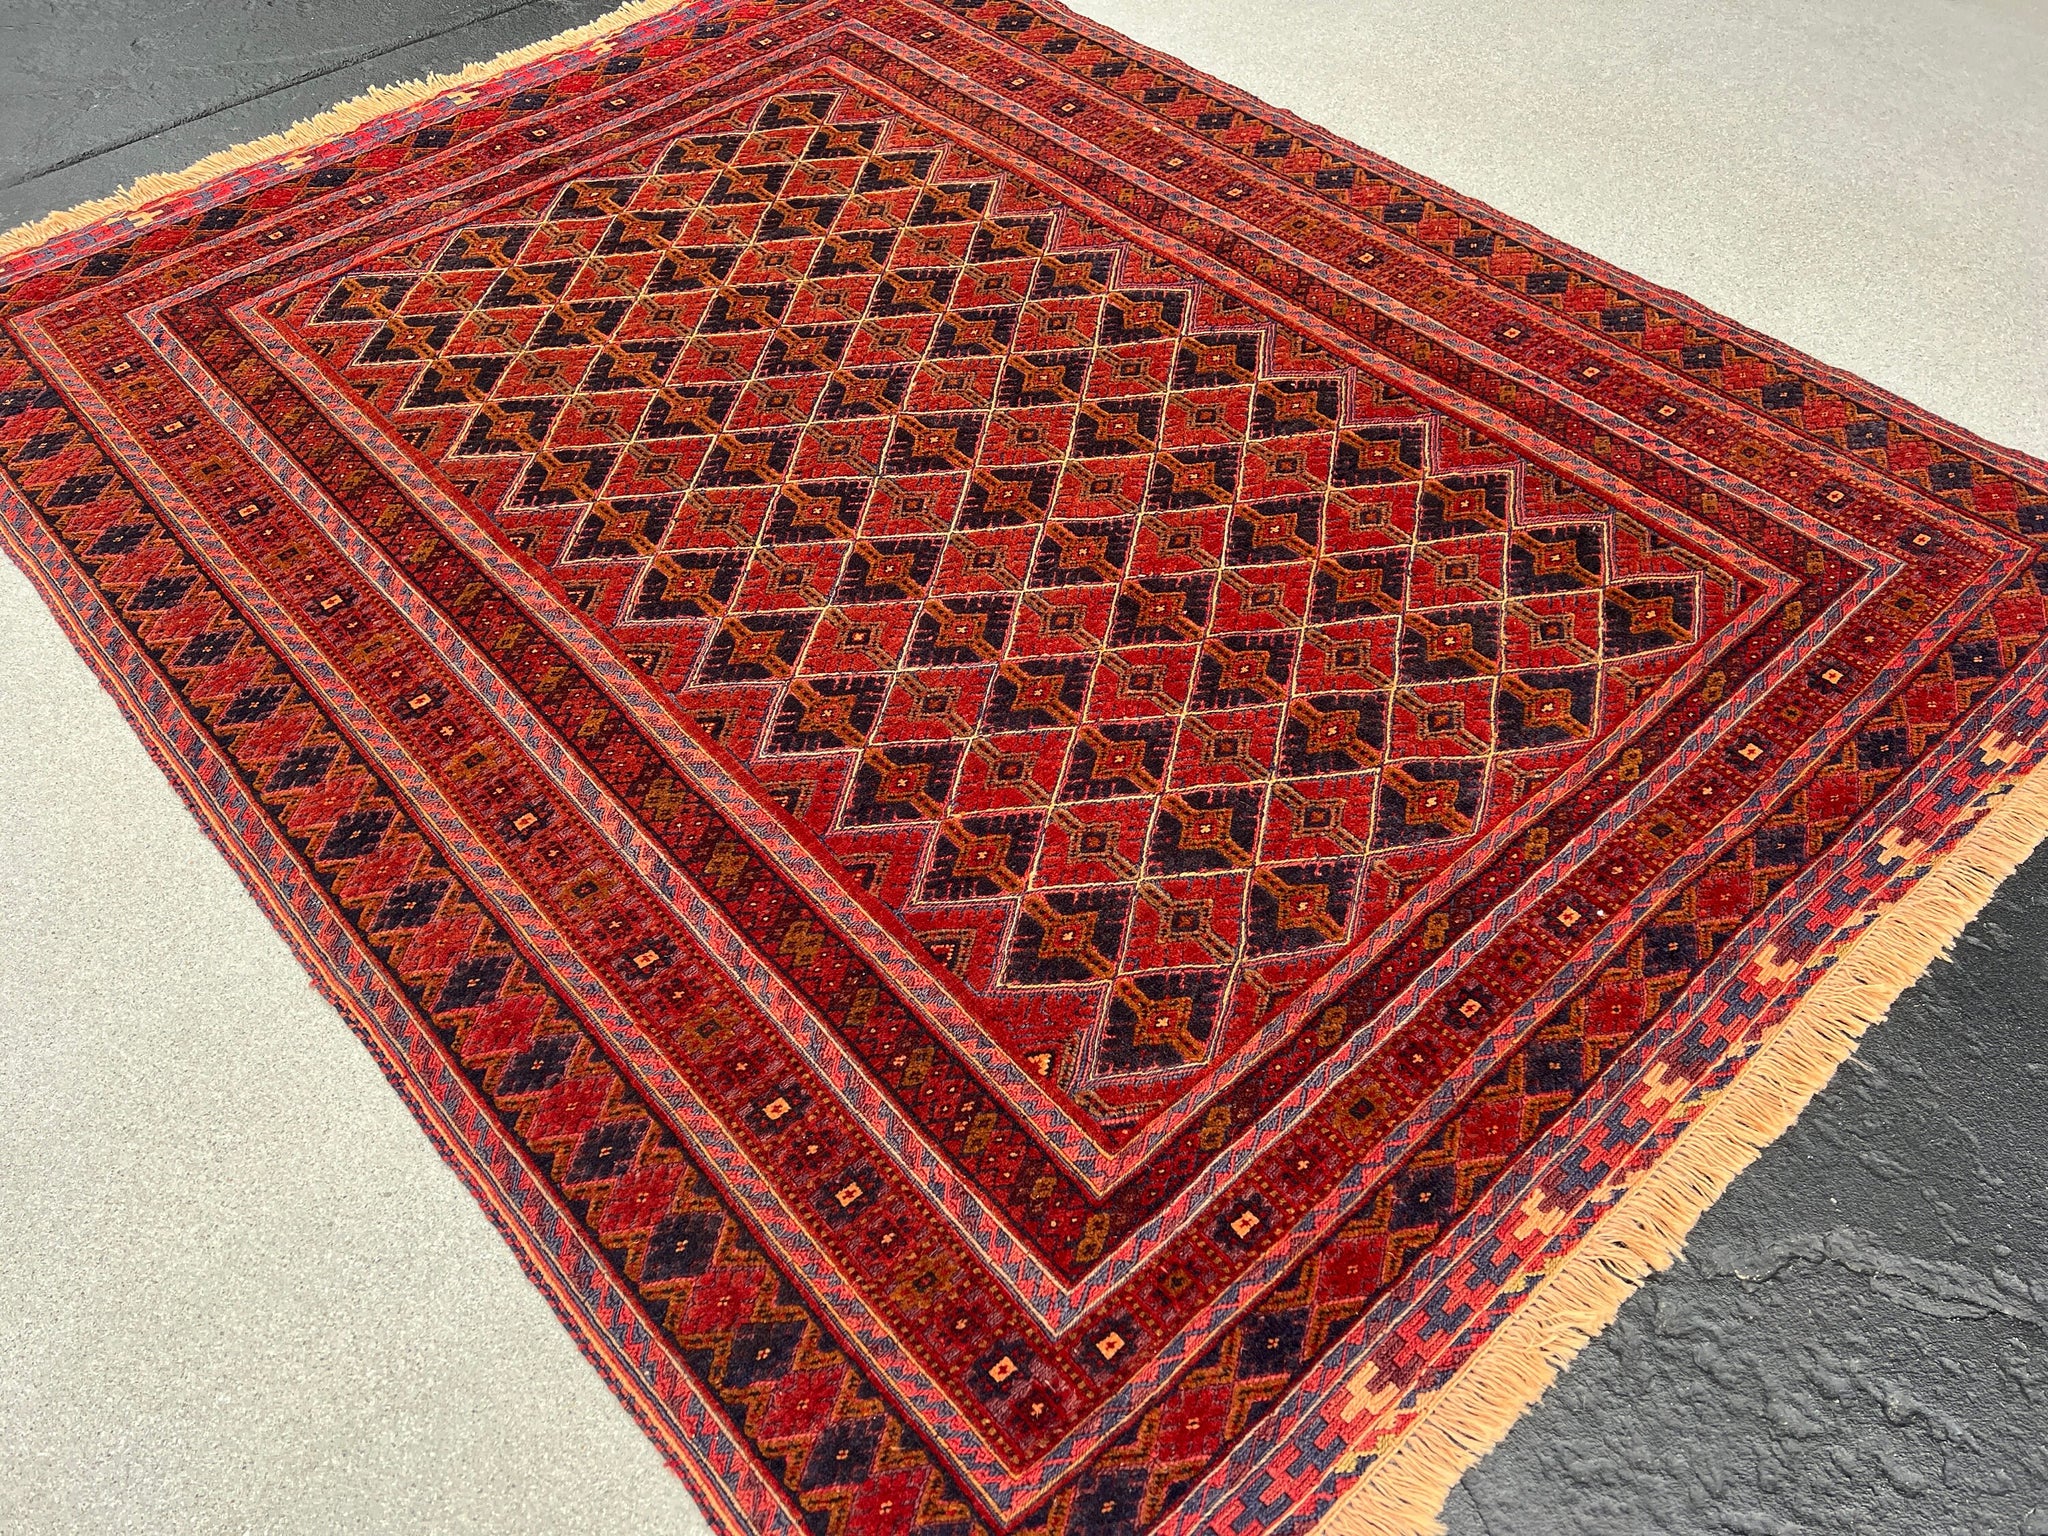 5x7 (150x215) Handmade Vintage Afghan Rug | Blood Red Navy Blue Taupe Chocolate Brown Orange Olive Green | Hand Knotted Bohemian Wool